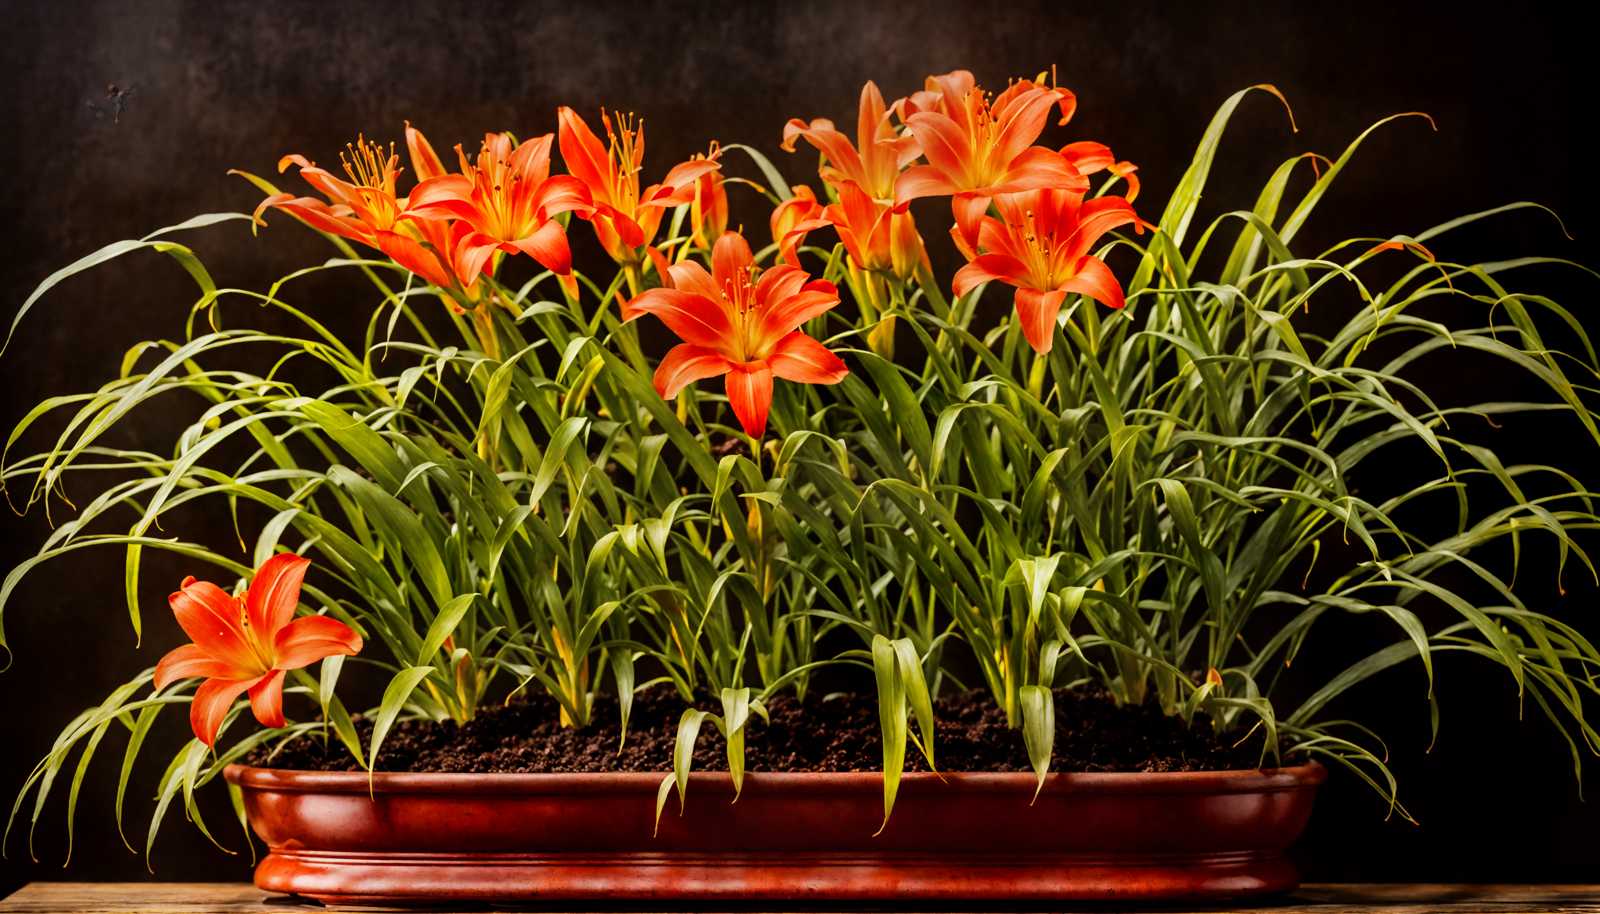 A cluster of Hemerocallis fulva (orange daylilies) in a planter on a wooden table, with clear lighting and a dark background.